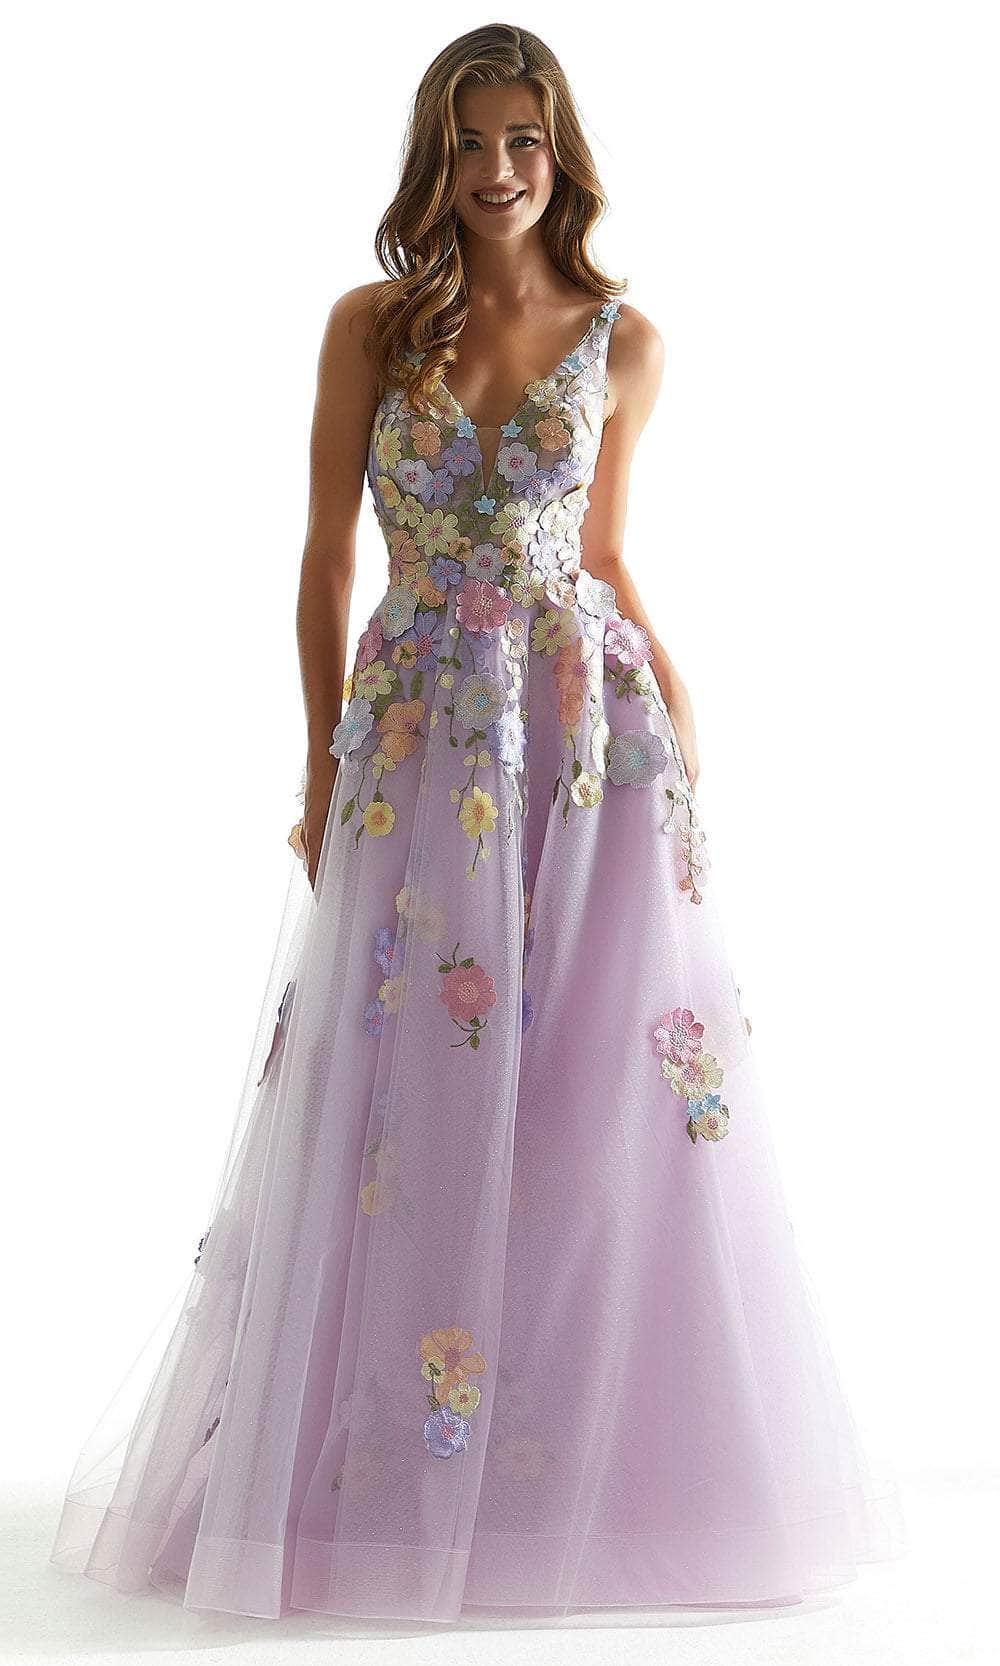 Image of Mori Lee 49074 - Floral A-Line Prom Dress